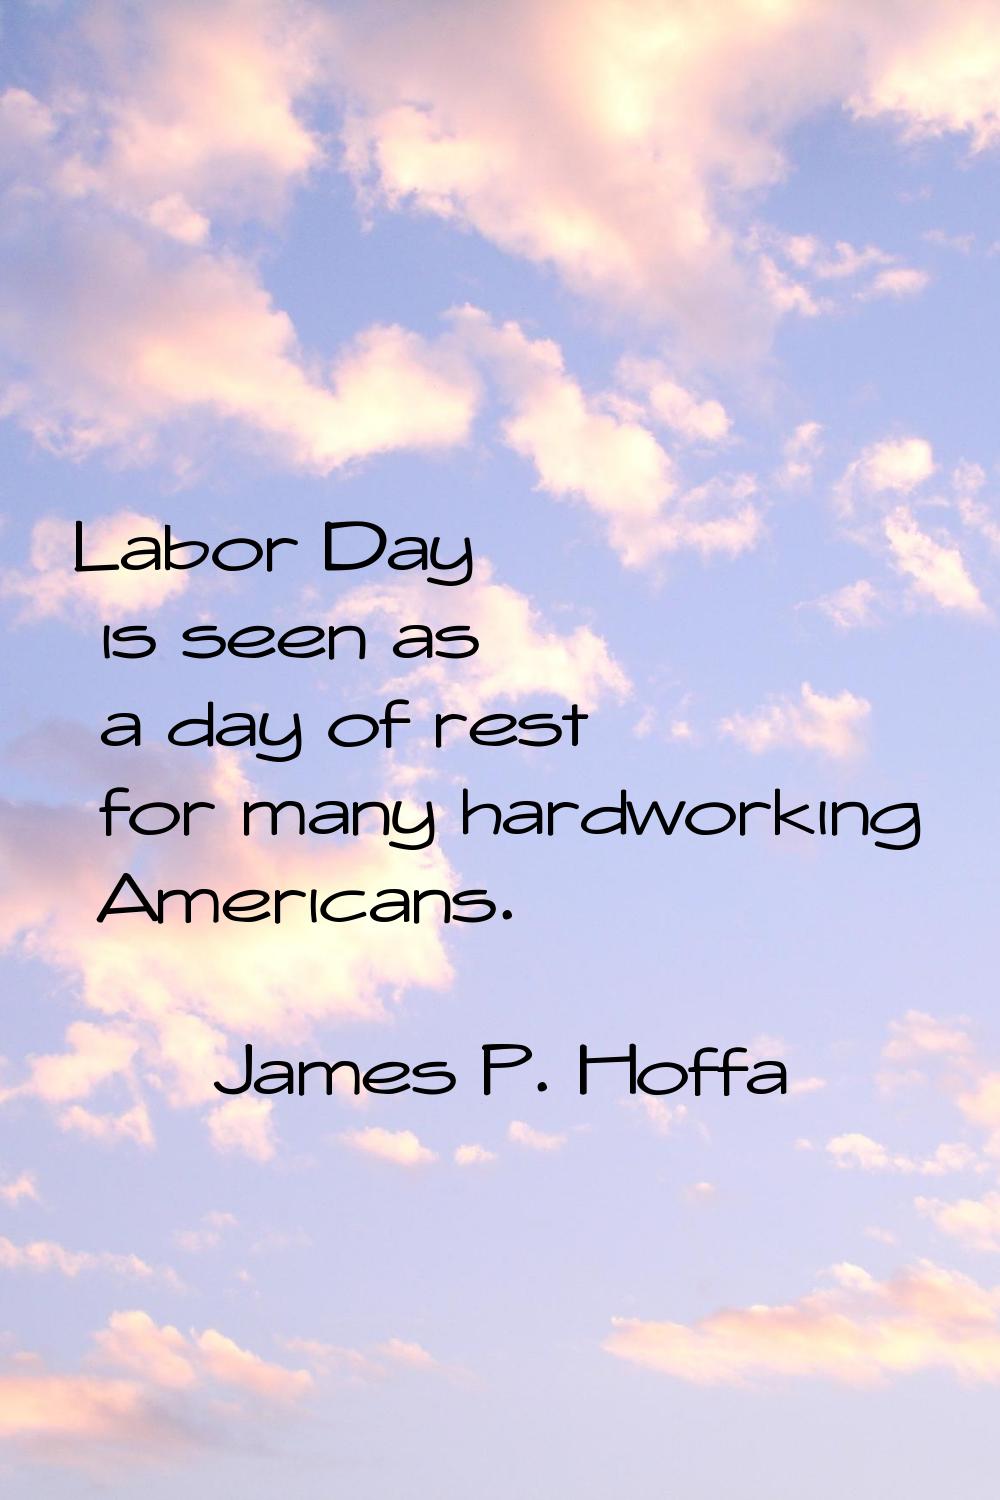 Labor Day is seen as a day of rest for many hardworking Americans.